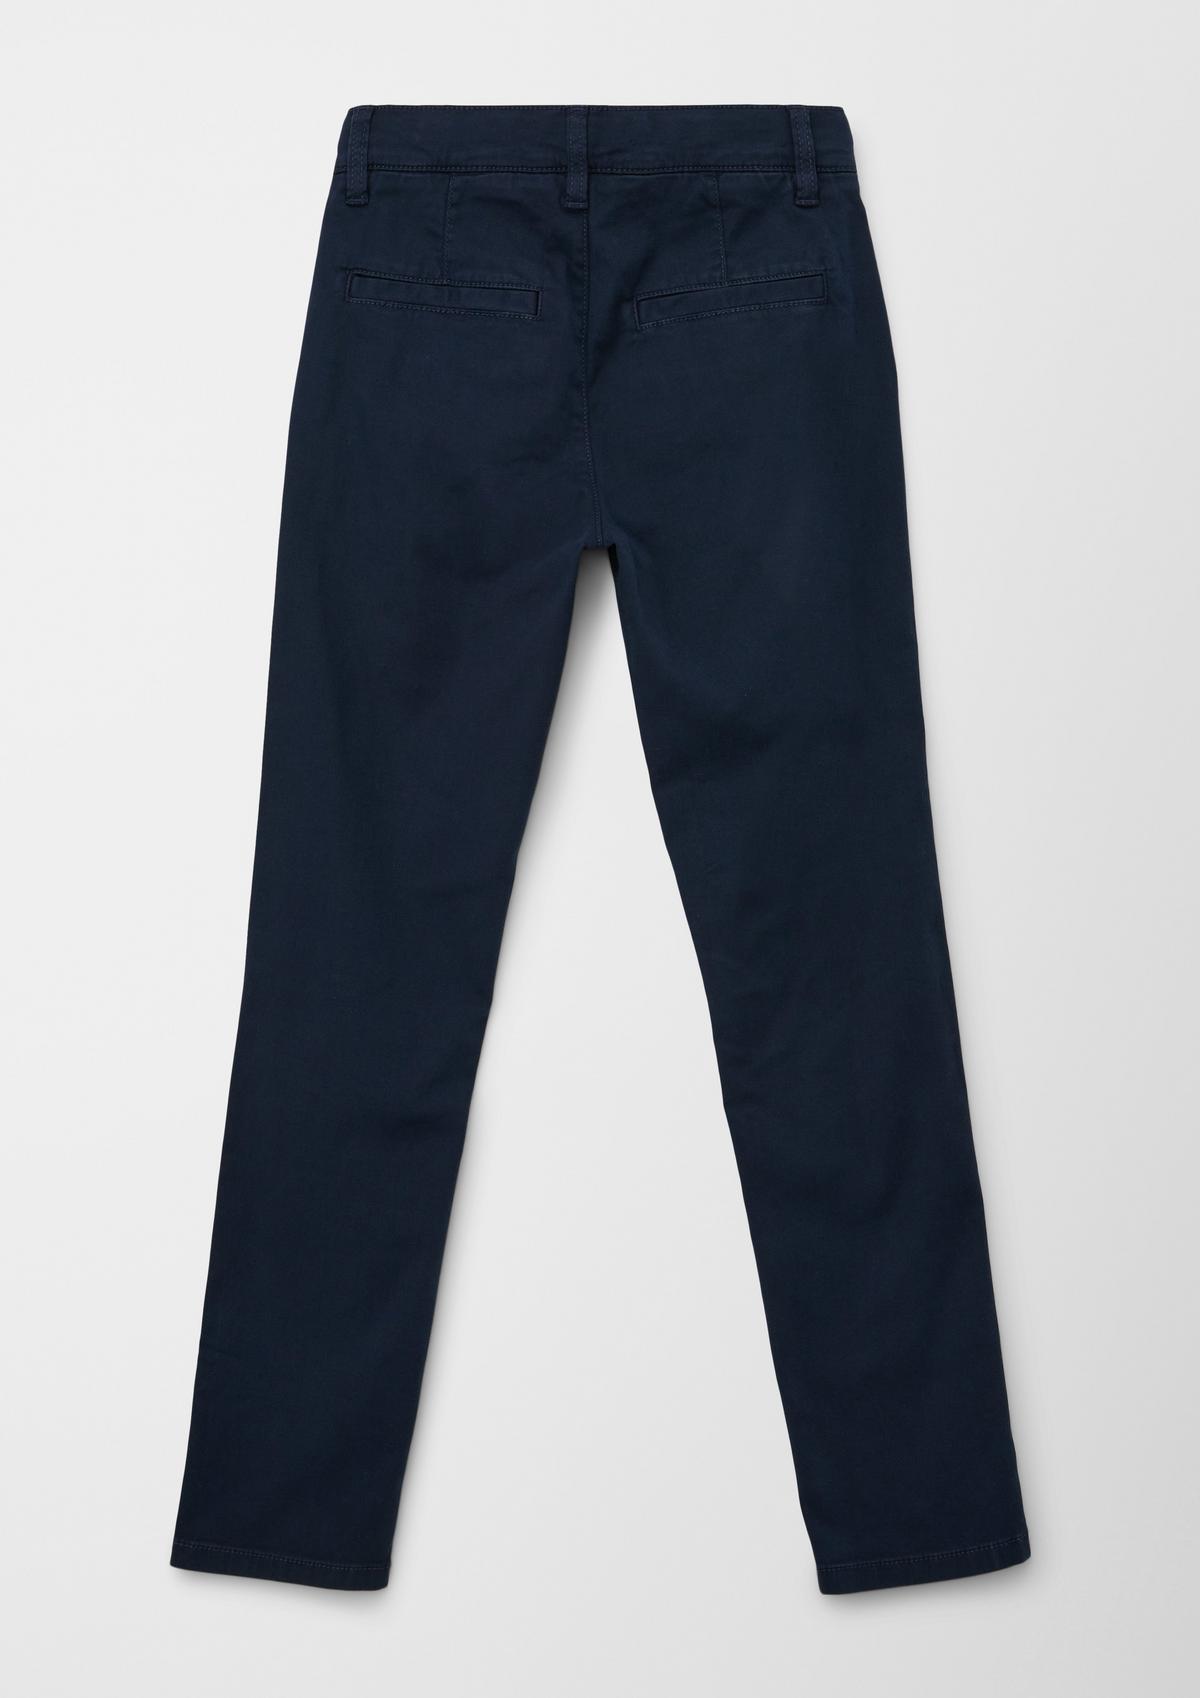 s.Oliver Slim fit: trousers with a dobby texture